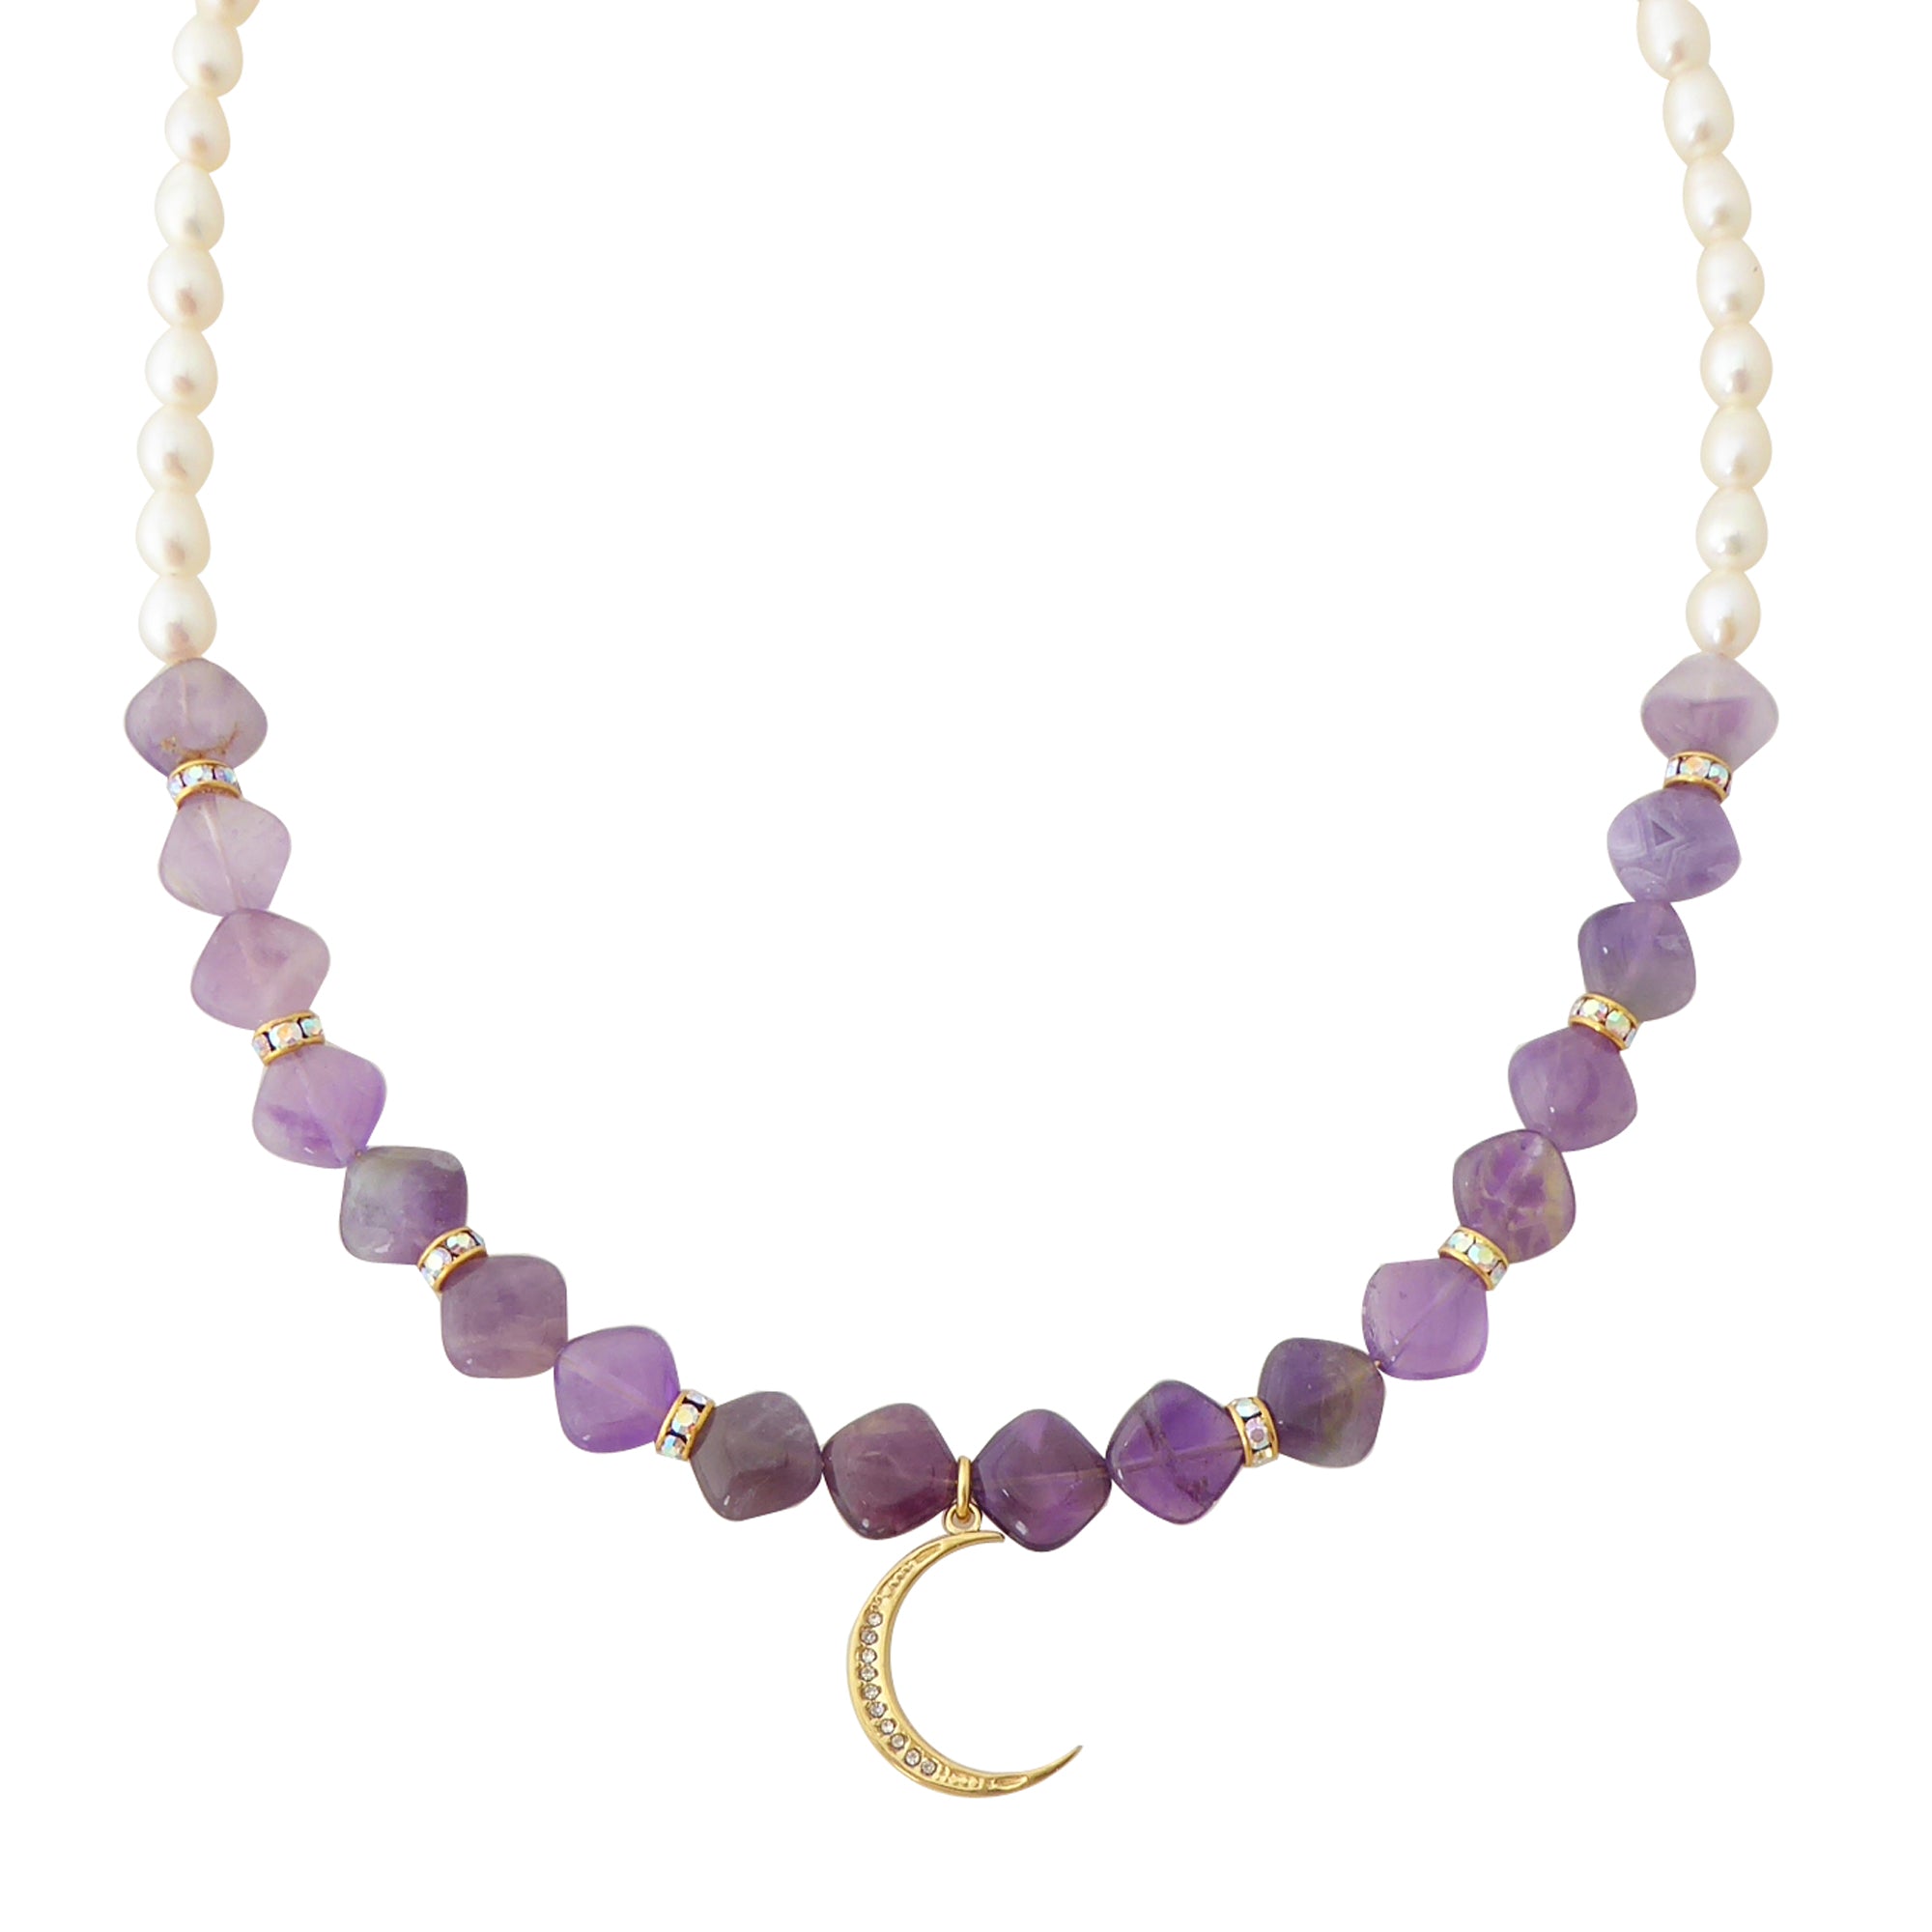  Amethyst and gold crescent moon necklace by Jenny Dayco 1